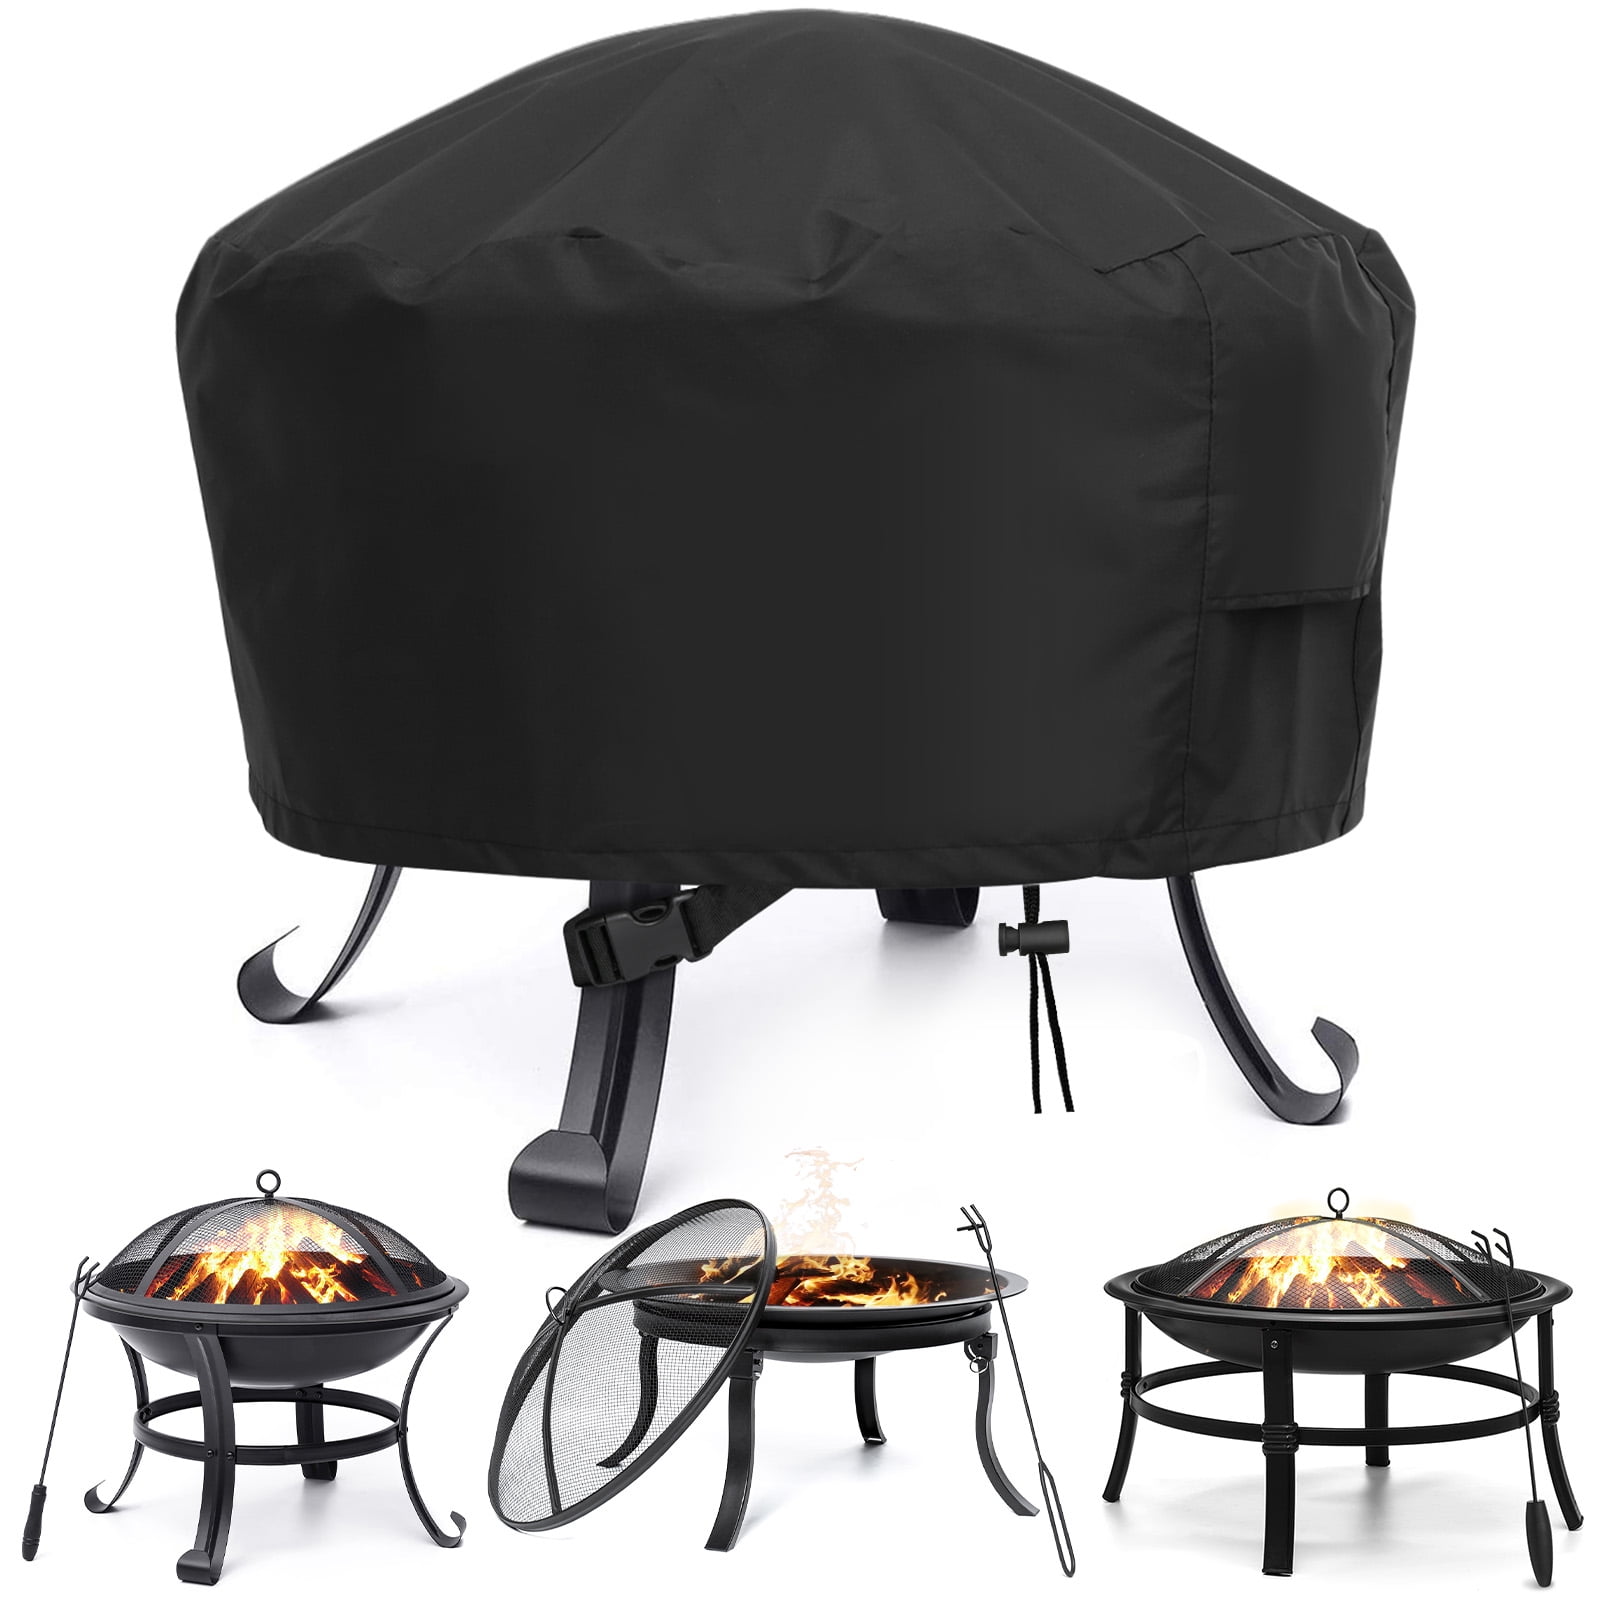 Details about   33/48 Inch Patio Round Fire Pit Cover Waterproof UV Protector Grill BBQ Cover 